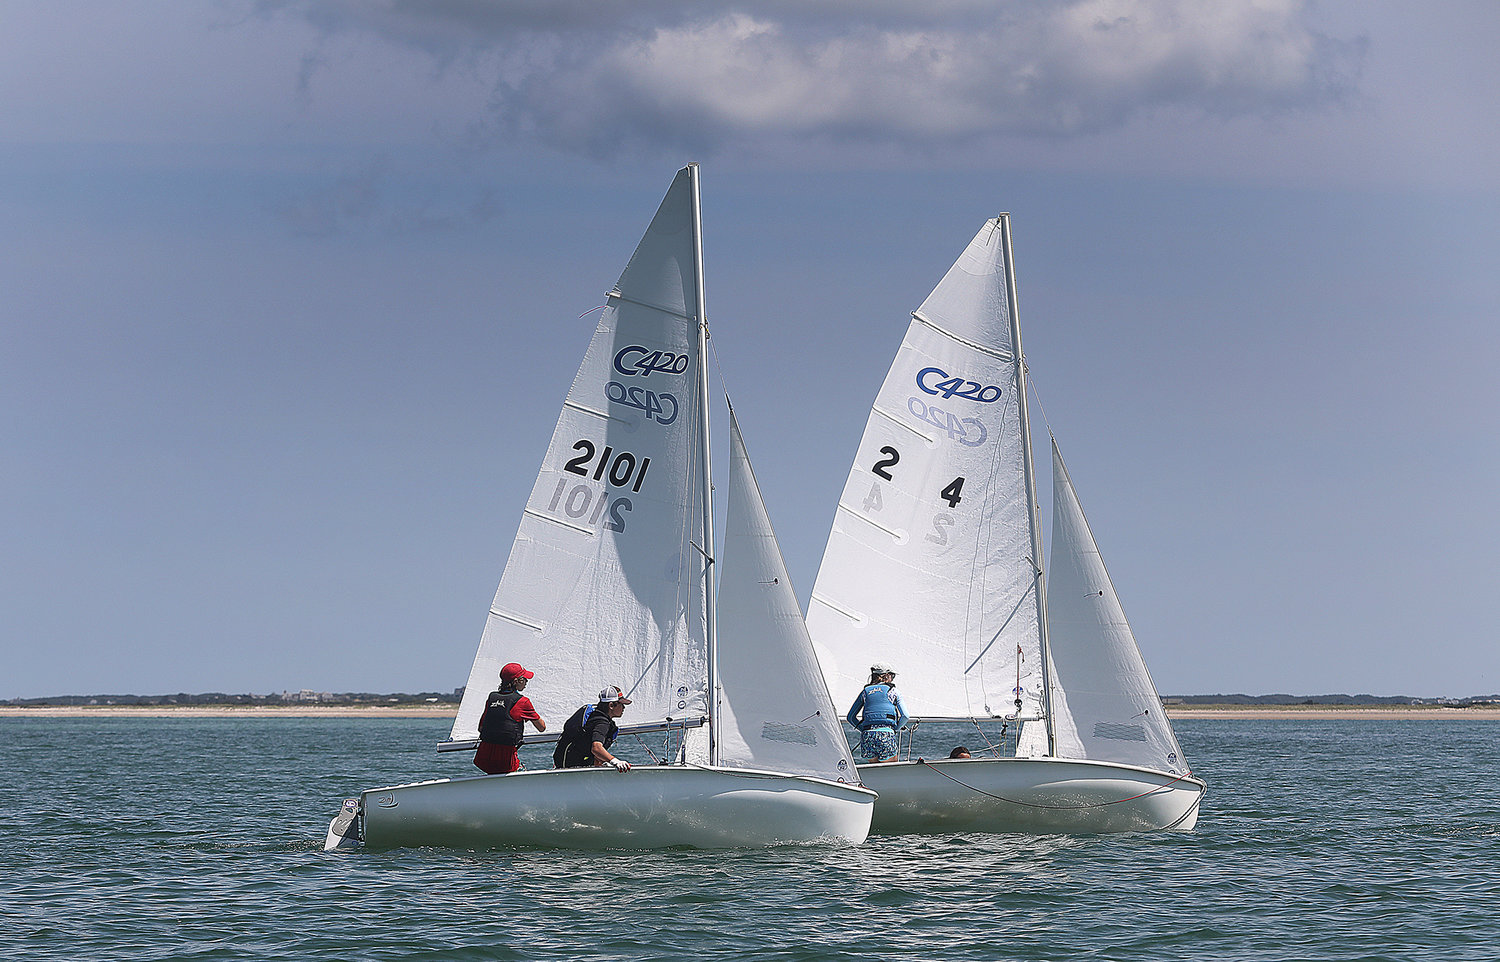 Two 420s race after the start on Tuesday.